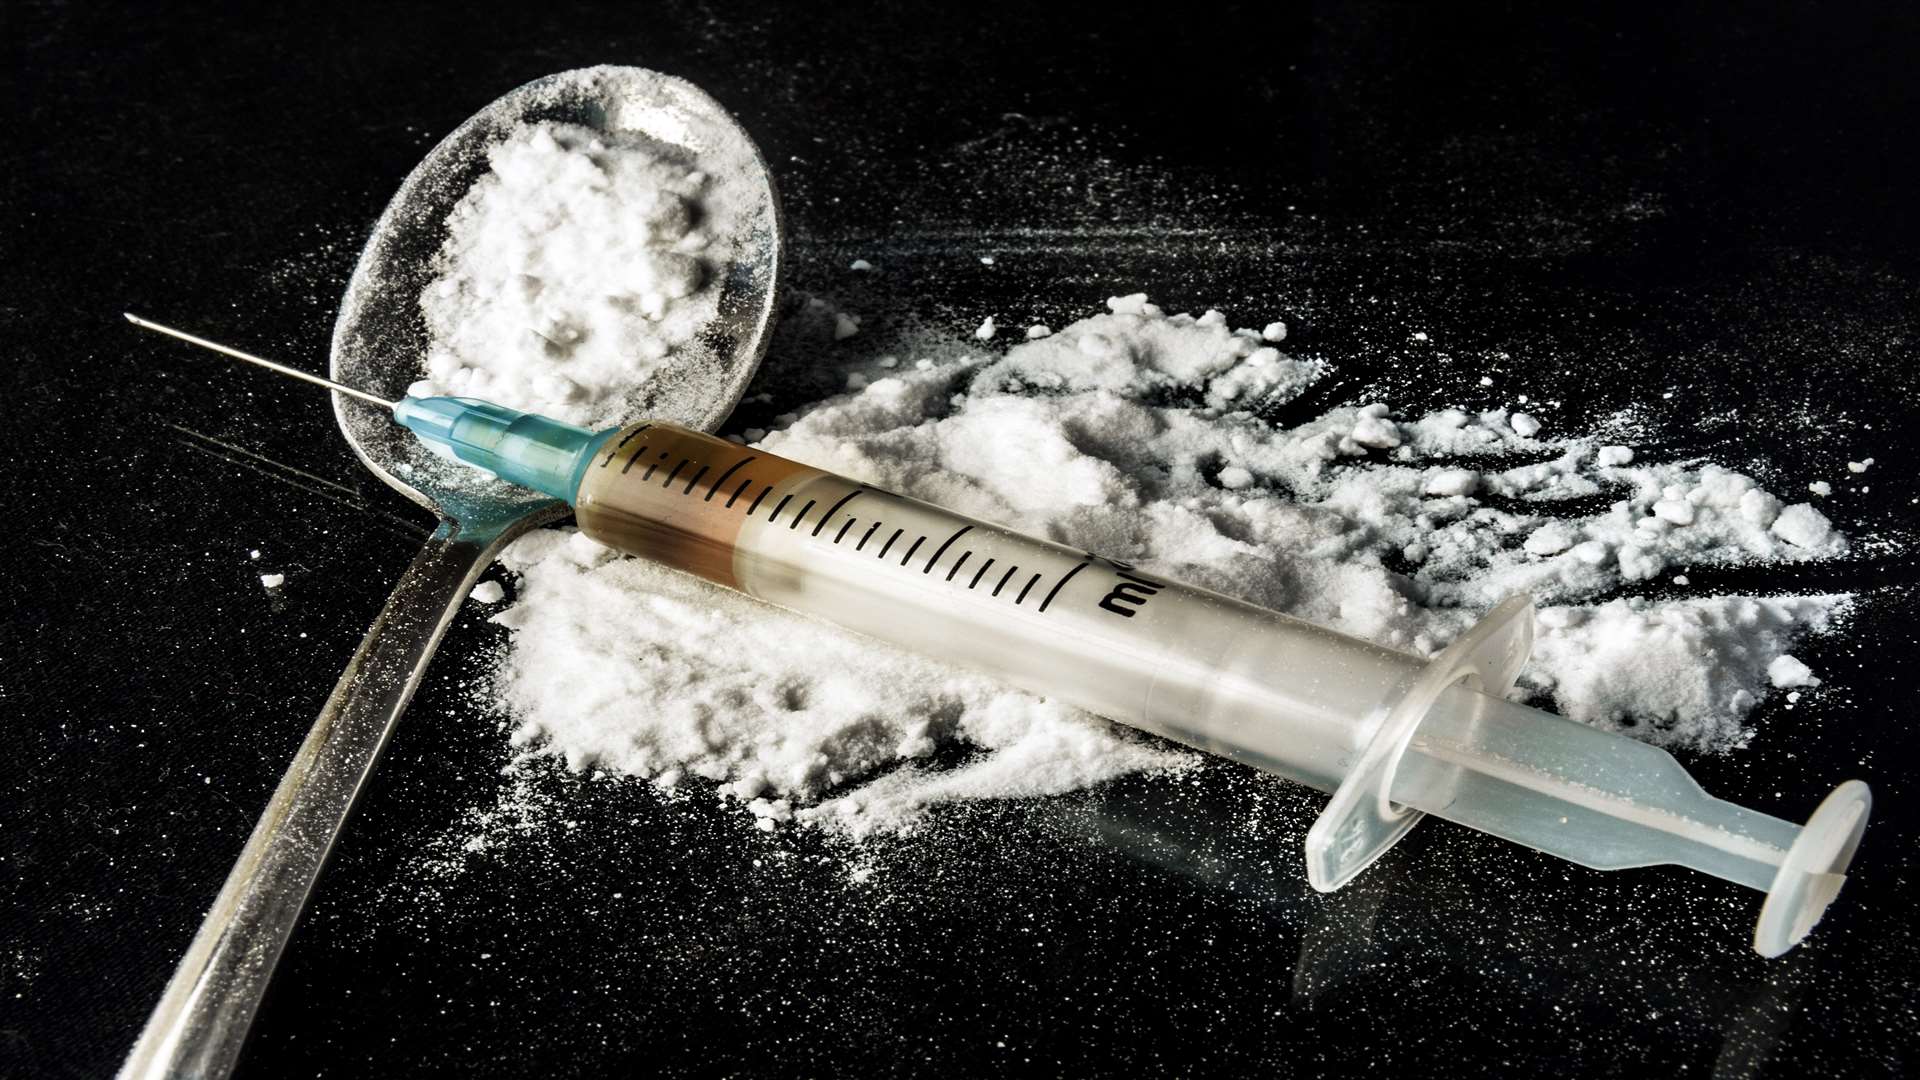 Drug syringe and heroin on a spoon. ISTOCK/Getty Image